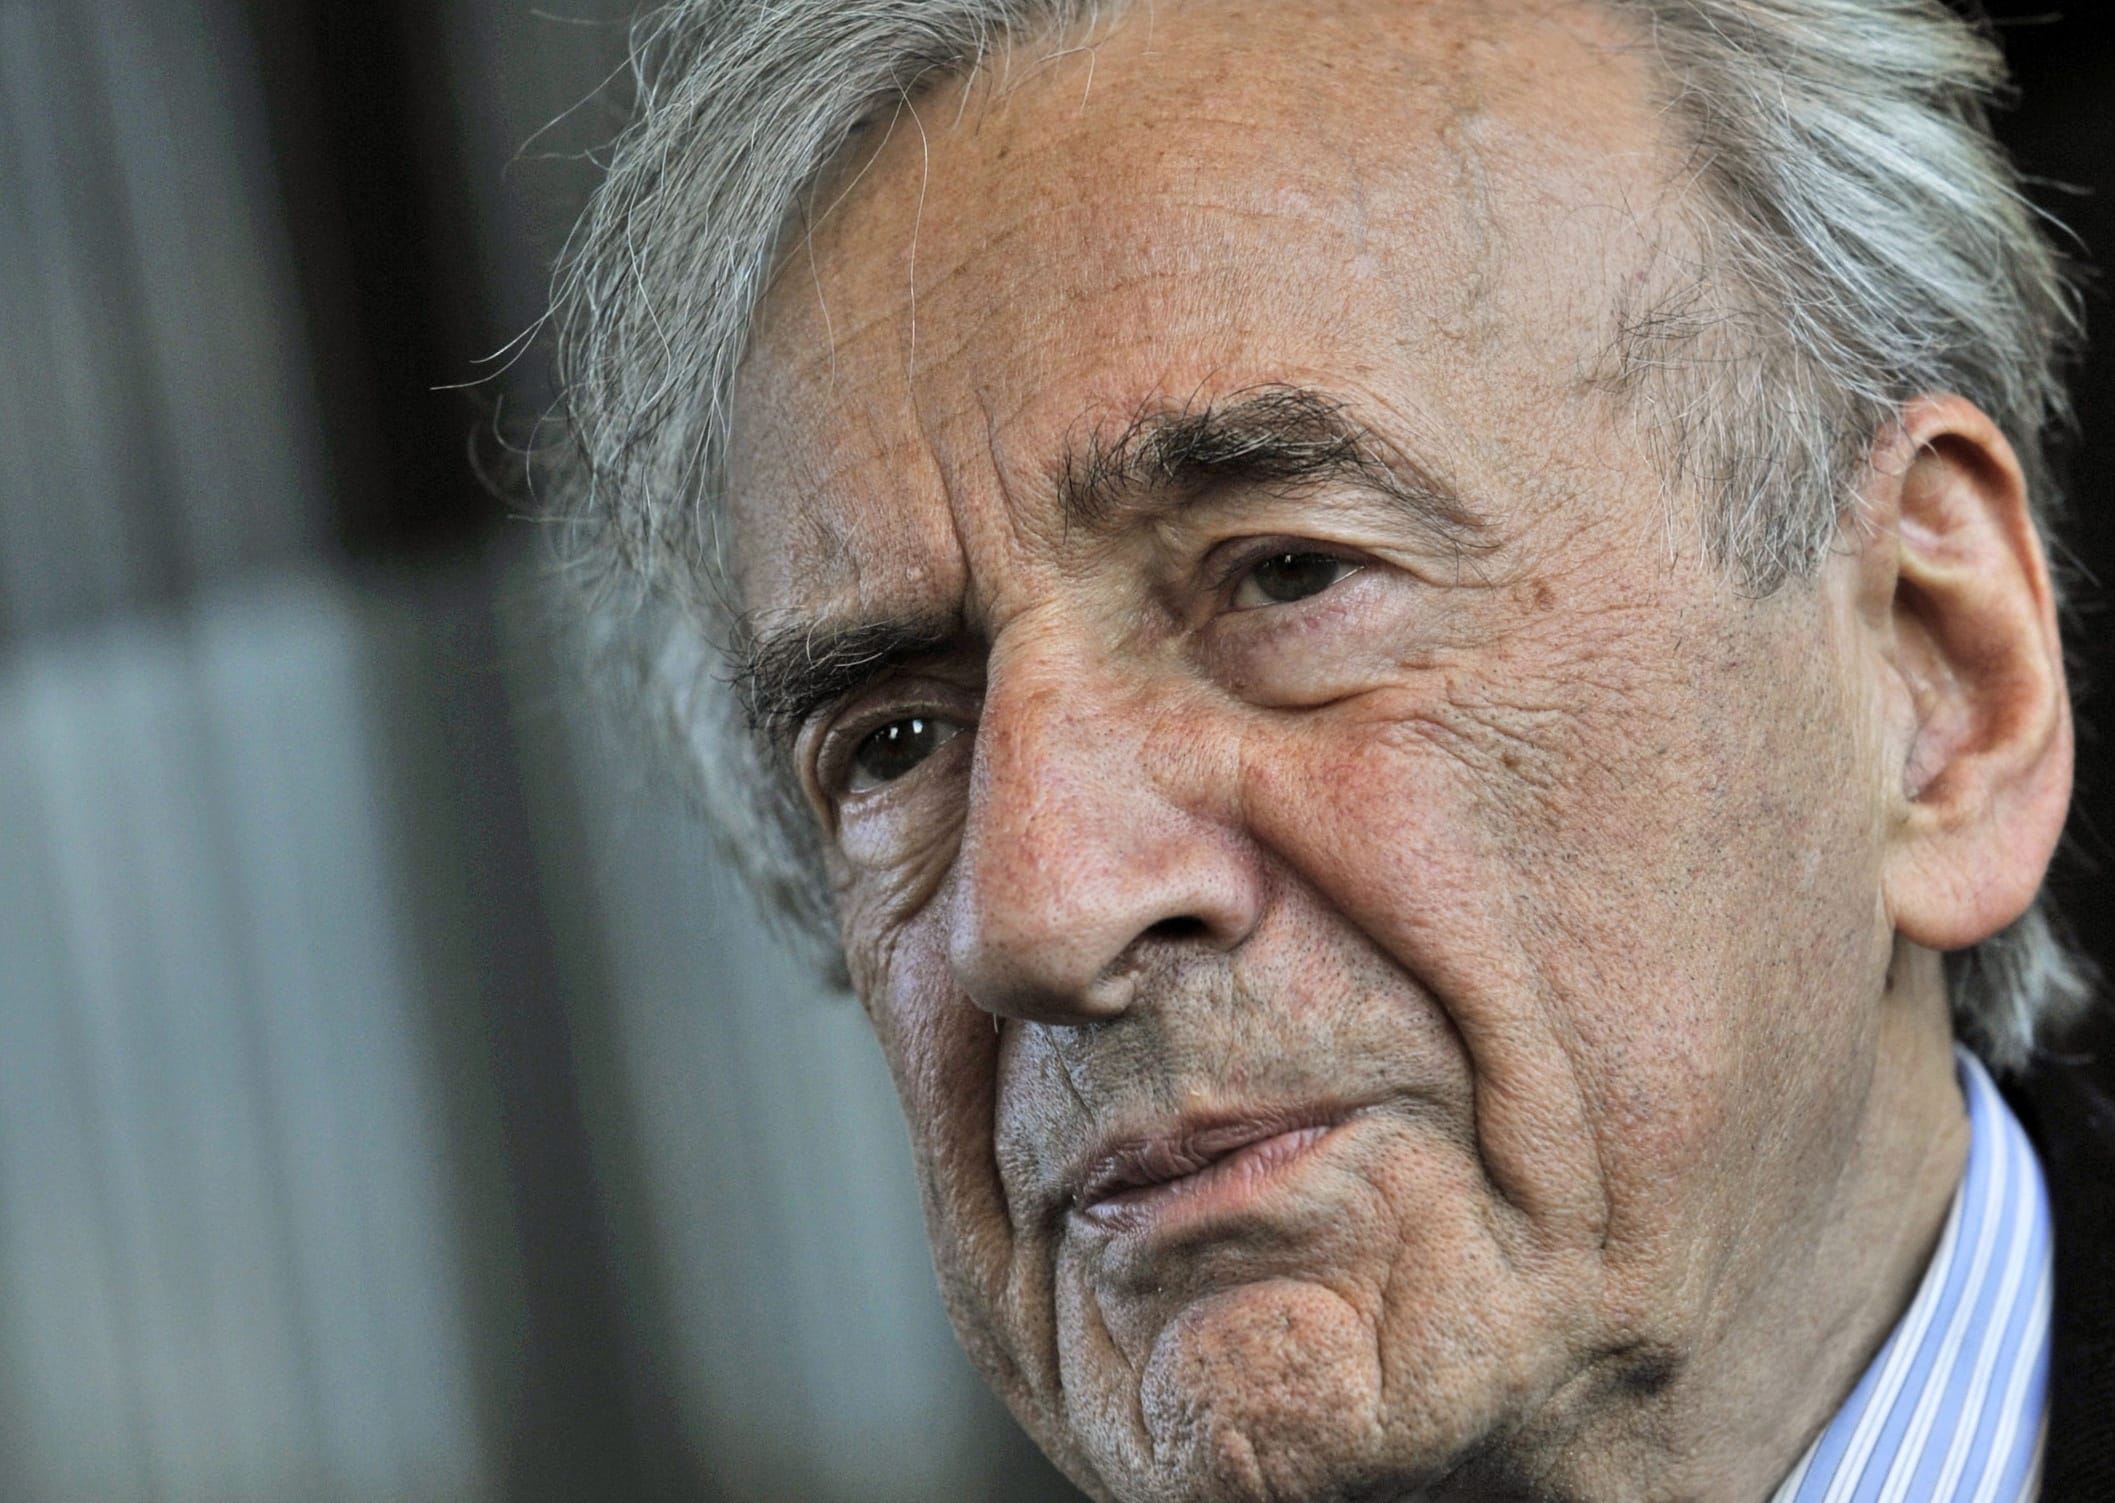 FILE - In this Dec. 10, 2009 file photo, Elie Wiesel listens during an interview with The Associated Press in Budapest, Hungary.  Wiesel, the Nobel laureate and Holocaust survivor has died.  His death was announced Saturday, July 2, 2016  by Israel's Yad Vashem Holocaust Memorial.